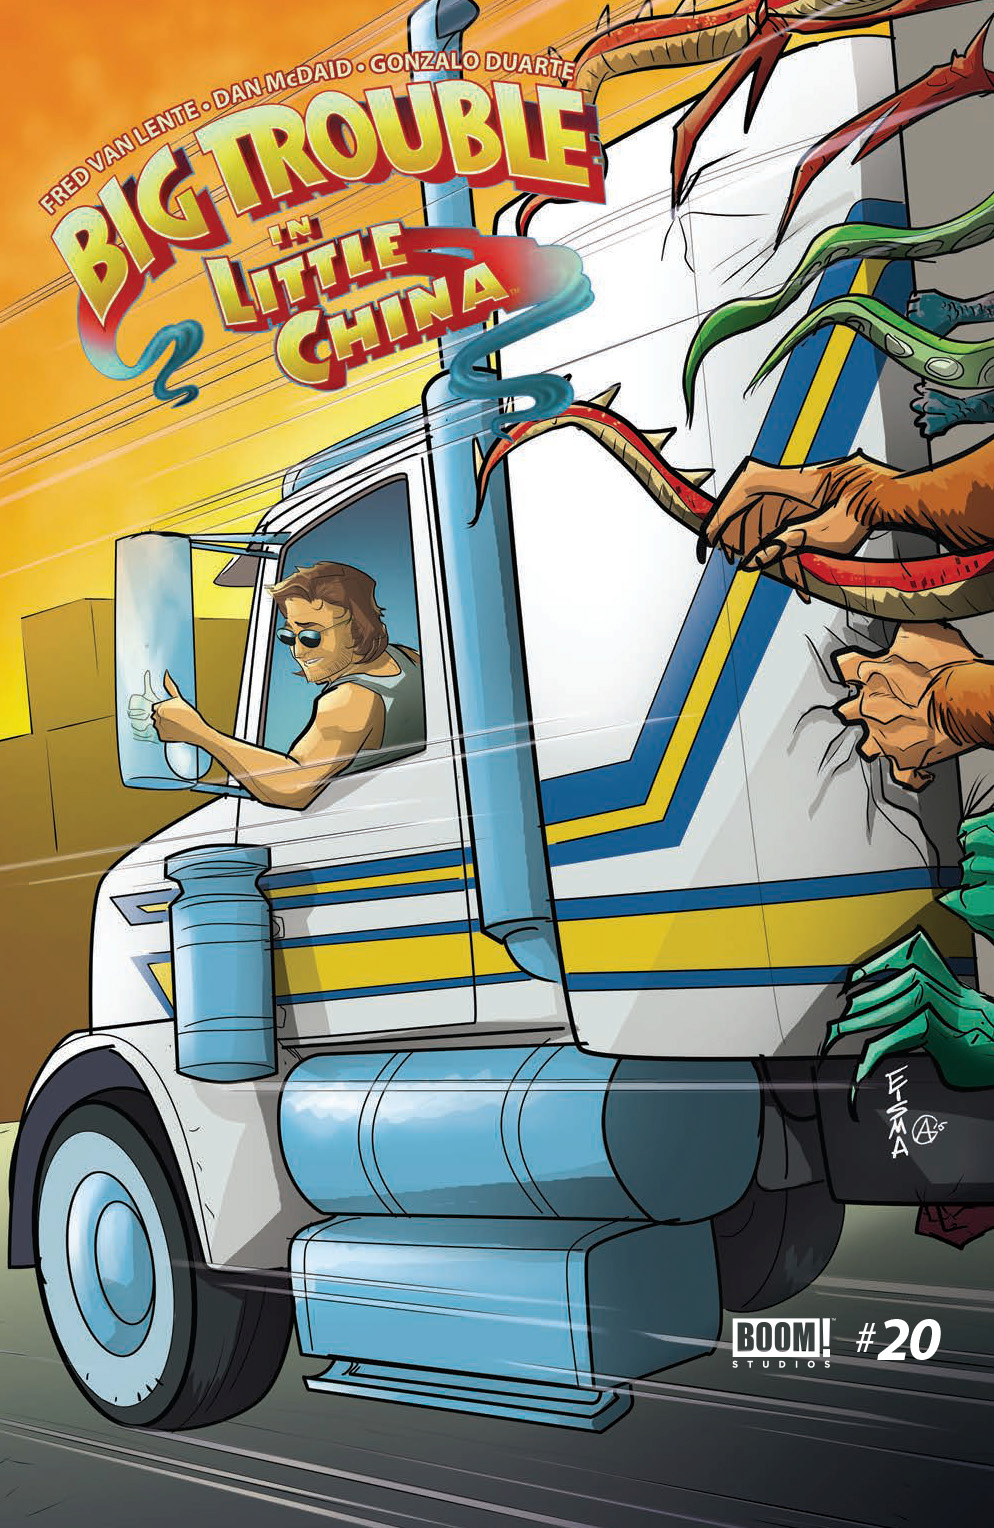 BIG TROUBLE IN LITTLE CHINA #20